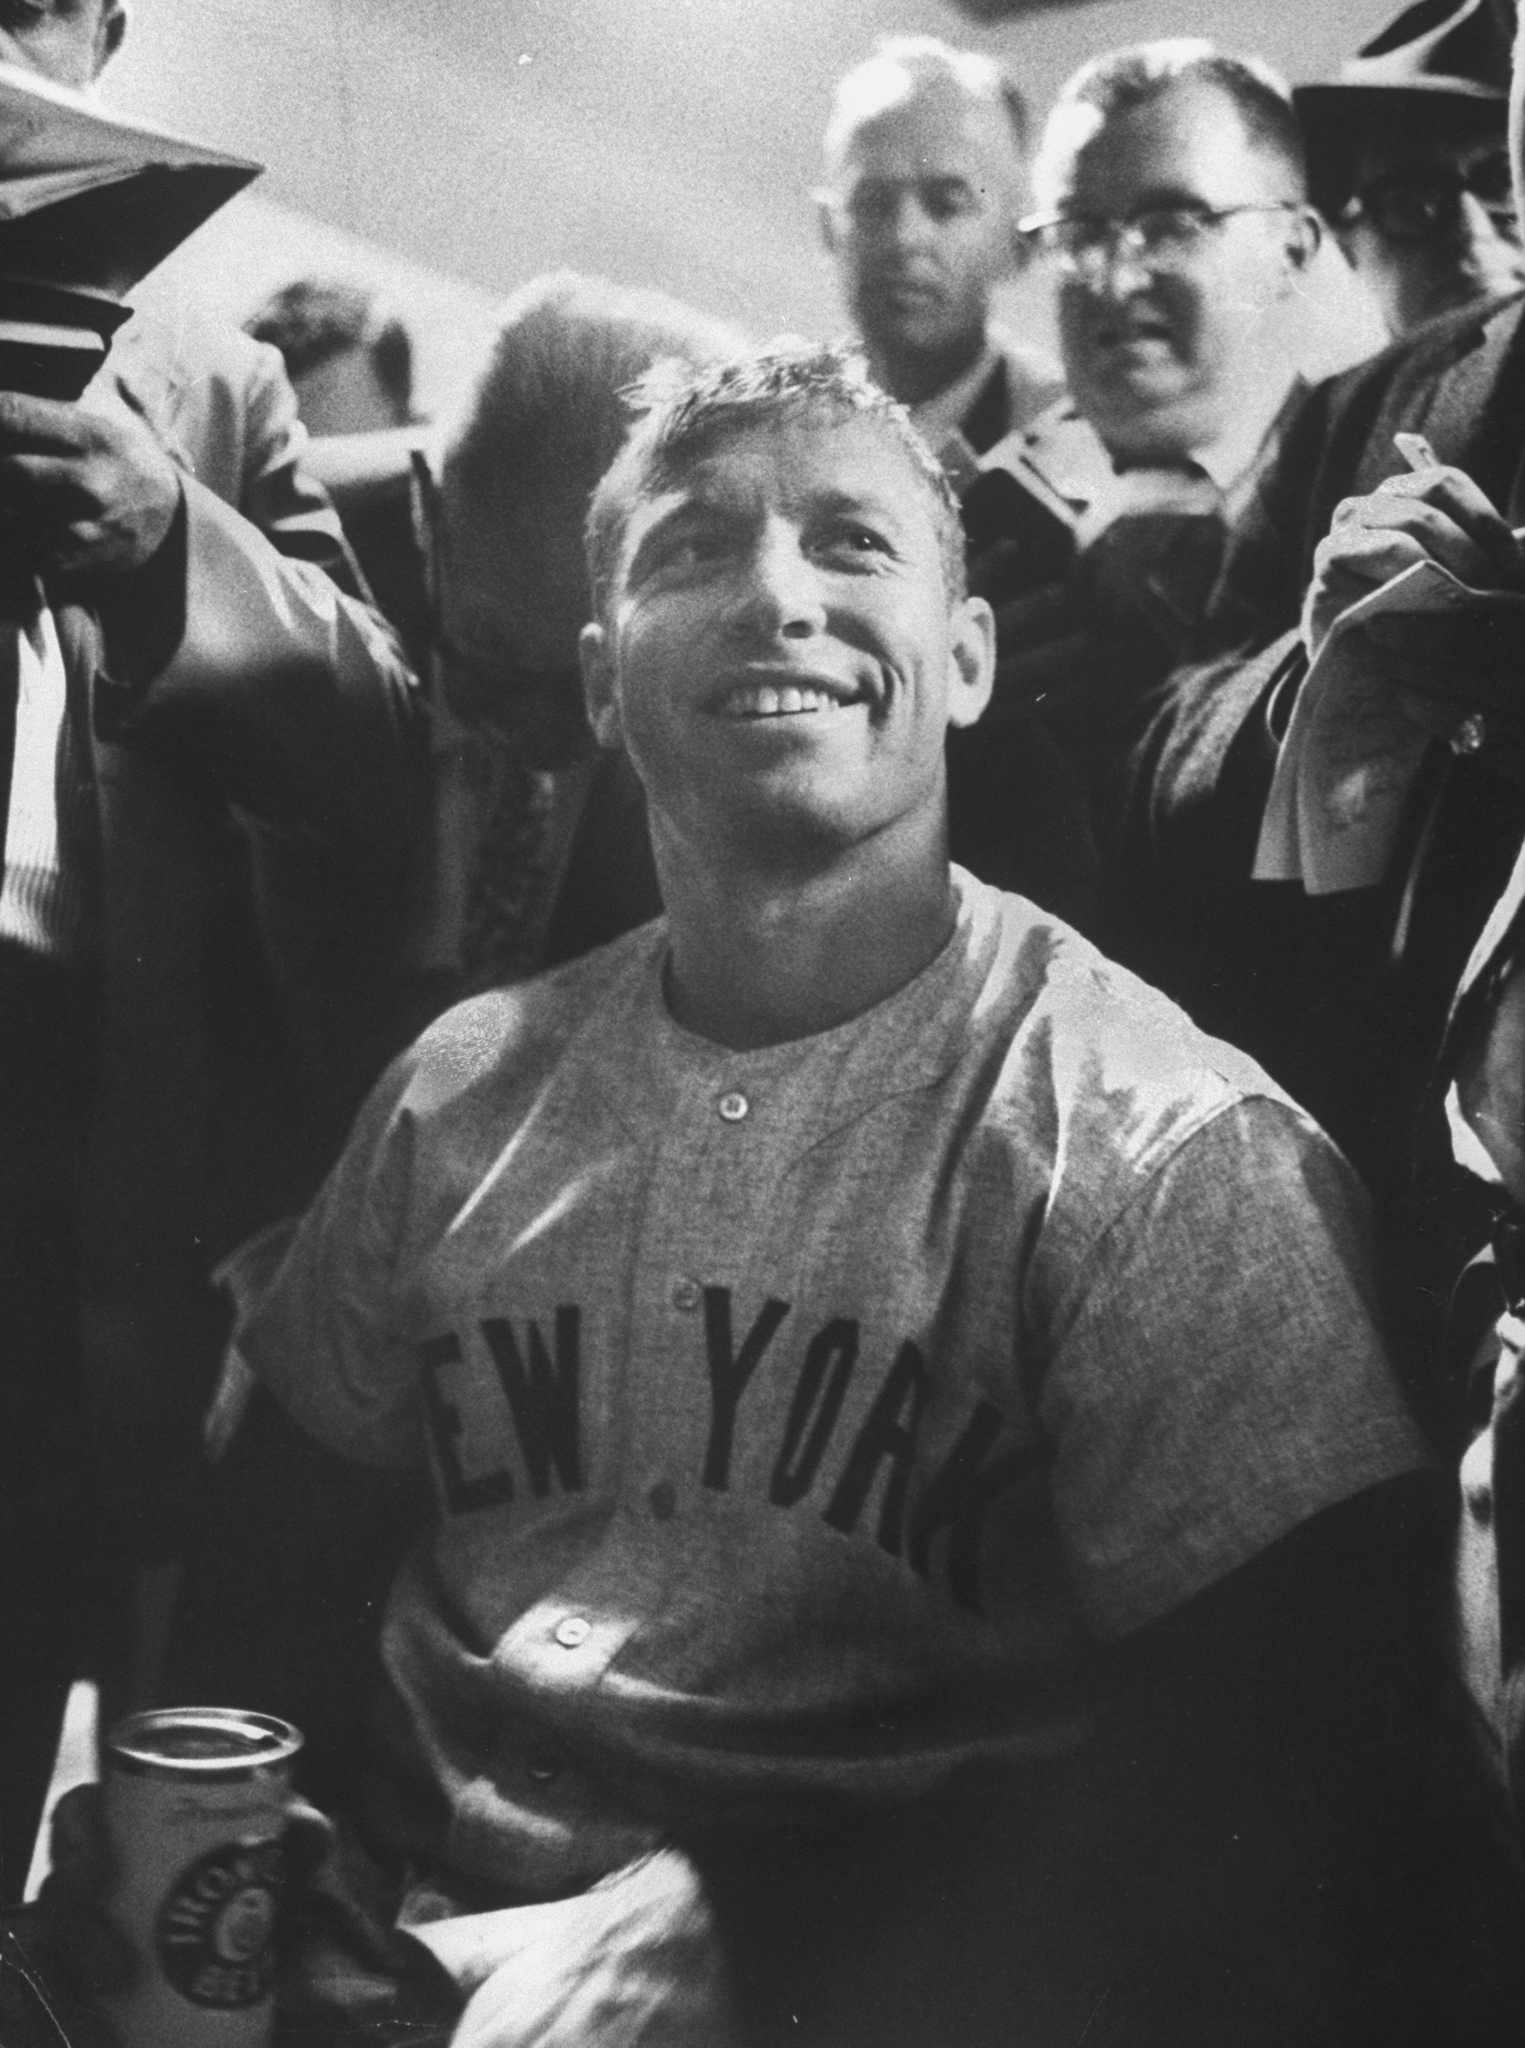 Surrounded by the press, Mickey Mantle, center, smiles after hitting two home runs in the World Series against the Pittsburgh Pirates in October 1960.